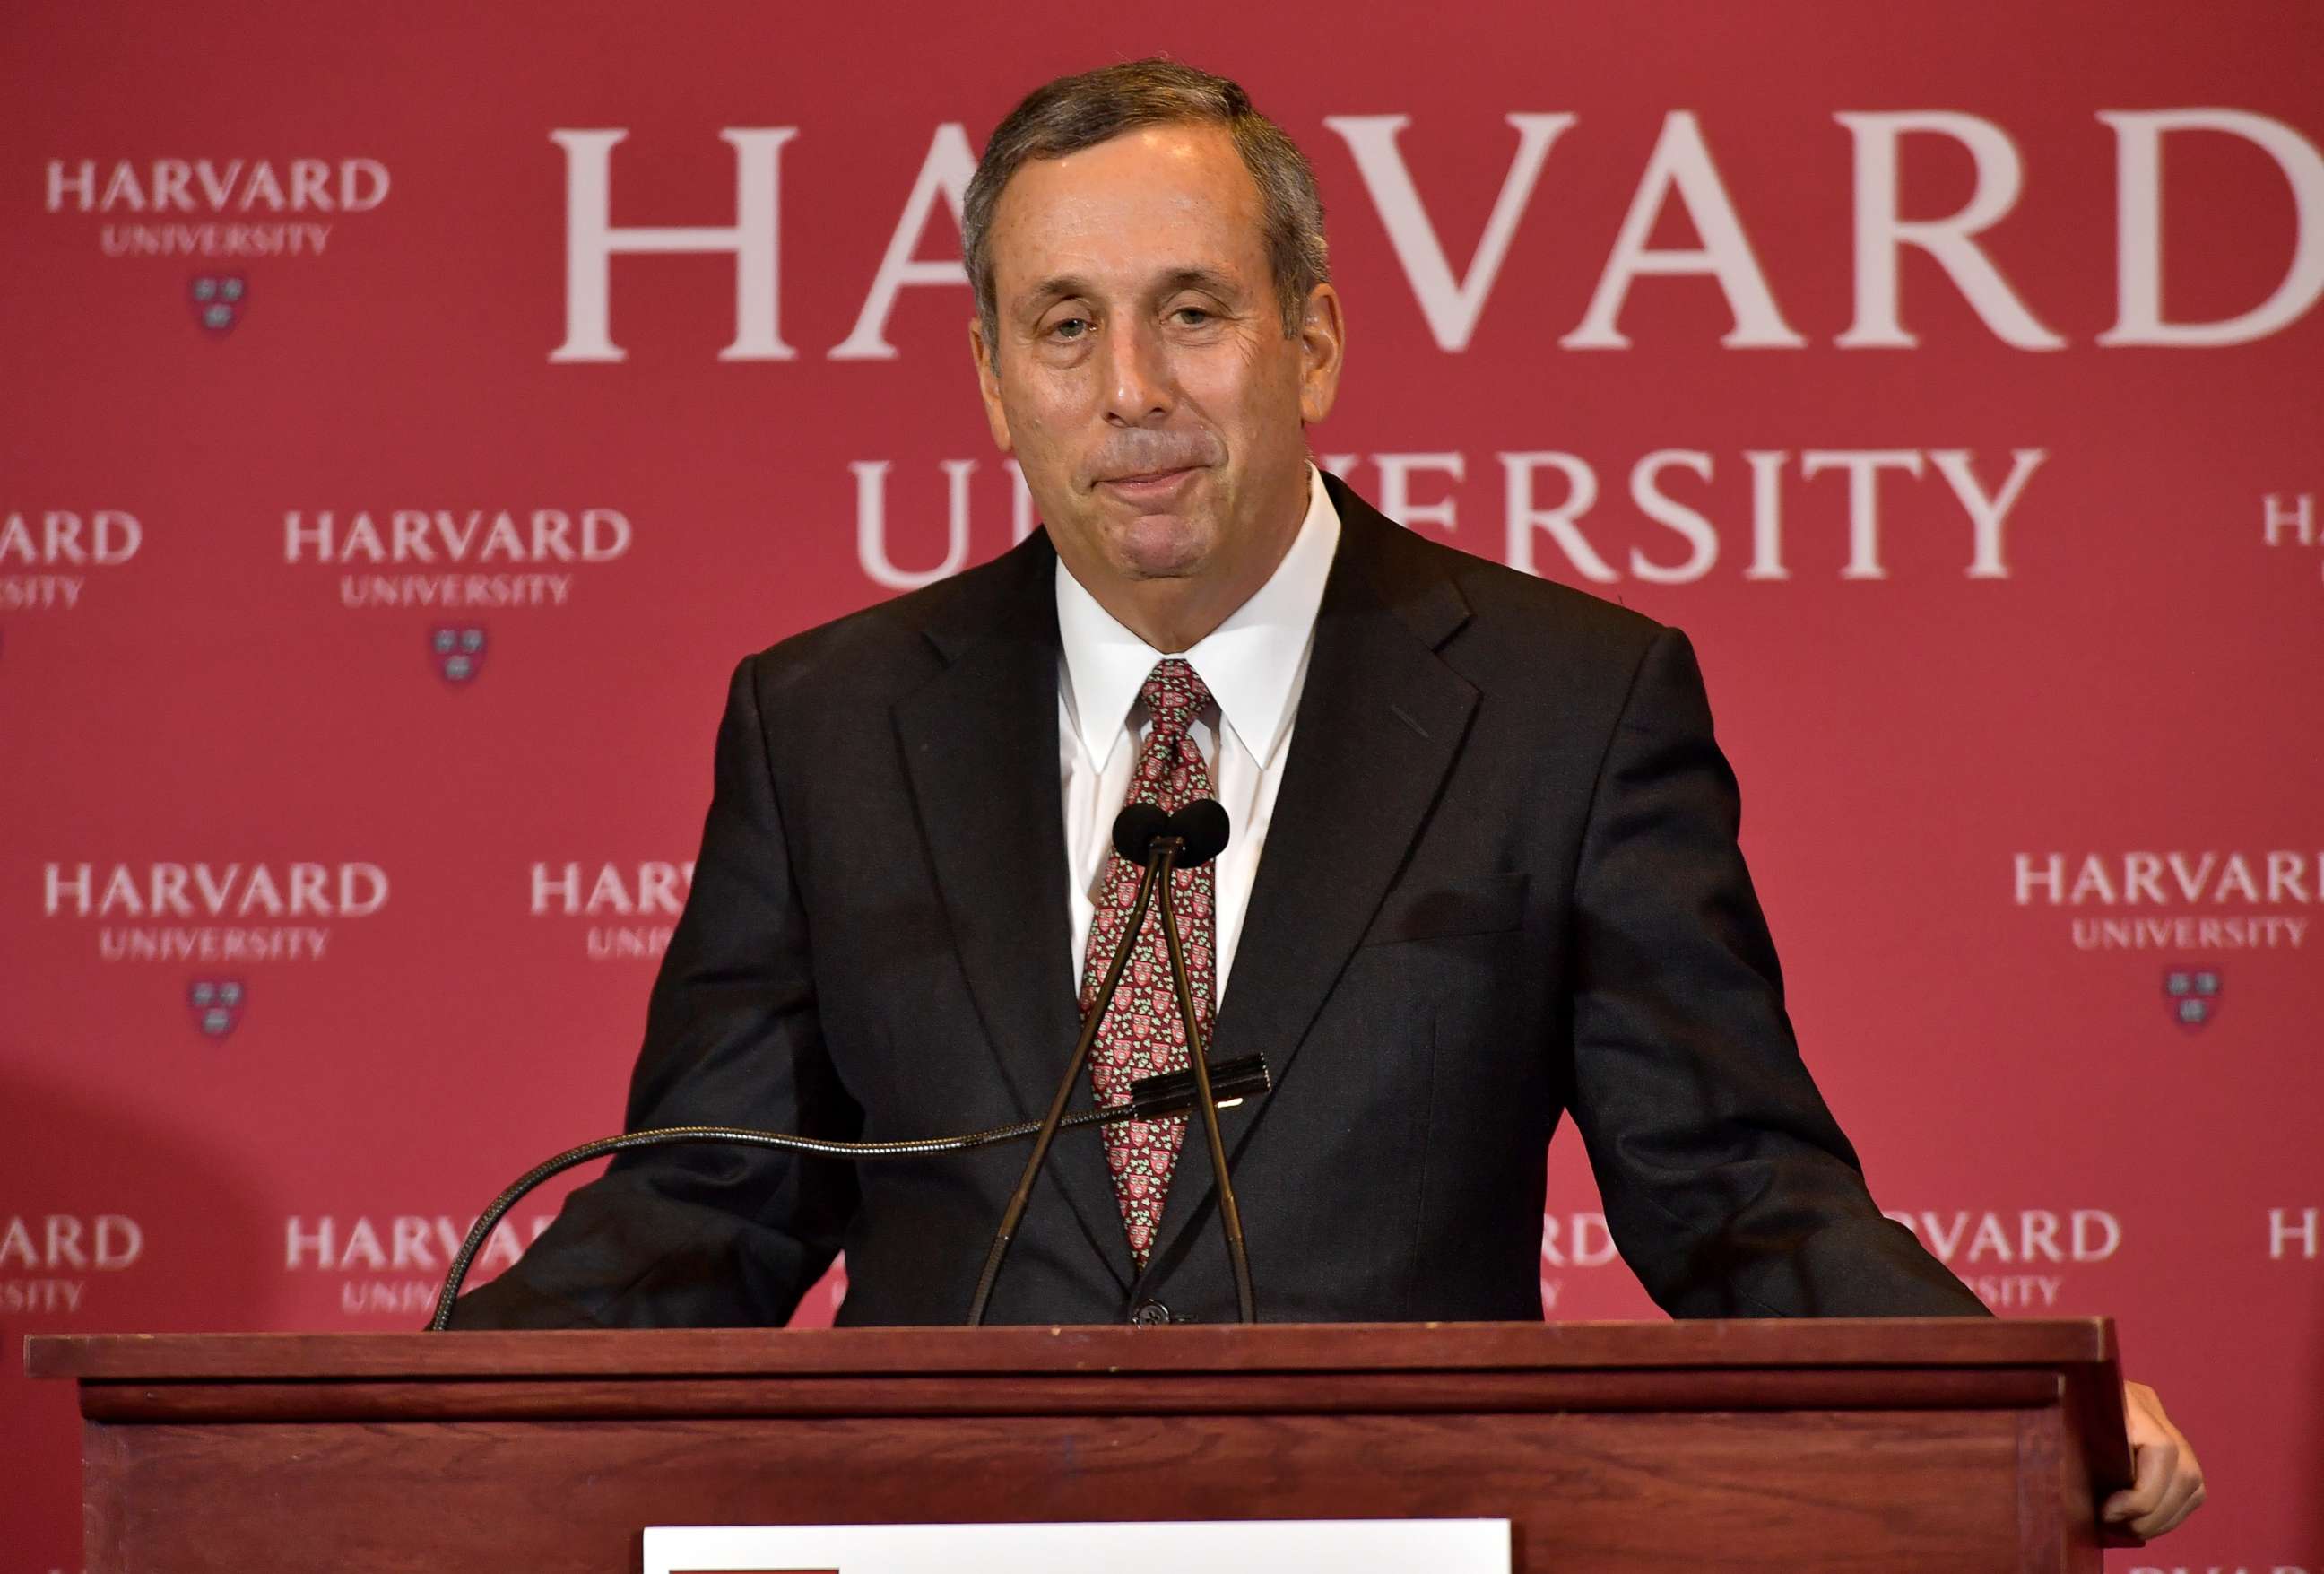 PHOTO: Lawrence Bacow speaks as he is introduced as Harvard University's 29th president during a news conference on February 11, 2018 in Cambridge, Massachusetts.